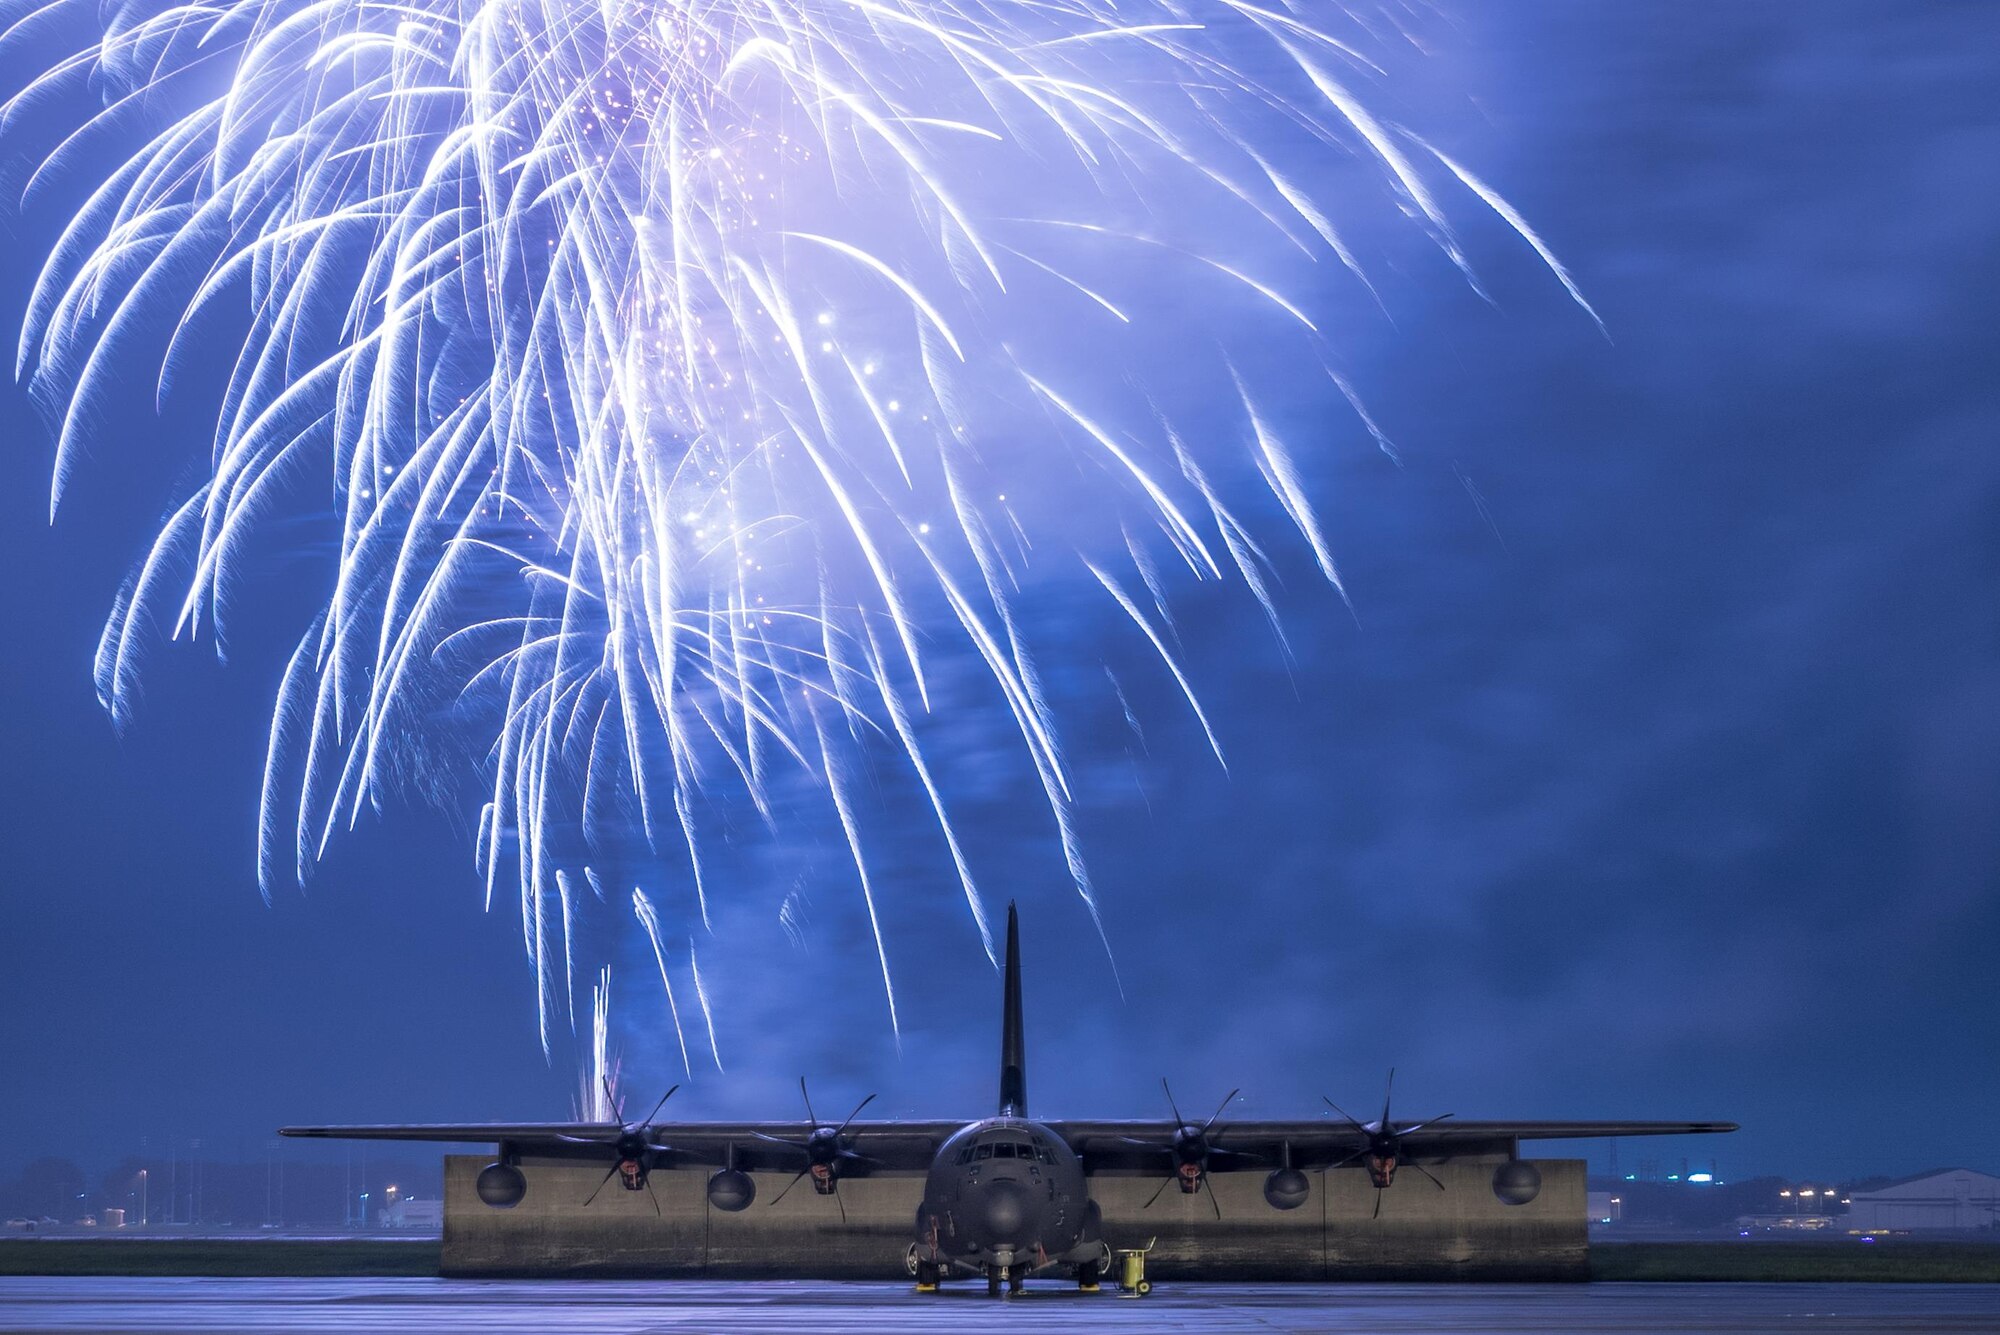 Fireworks explode over a C-130J Super Hercules at the 2016 Japanese-American Friendship Festival at Yokota Air Base, Japan, Sept. 18, 2016. Tens of thousands of people attend the festival every year to learn more about the US military and American culture.  (U.S. Air Force photo by Senior Airman Delano Scott/Released)